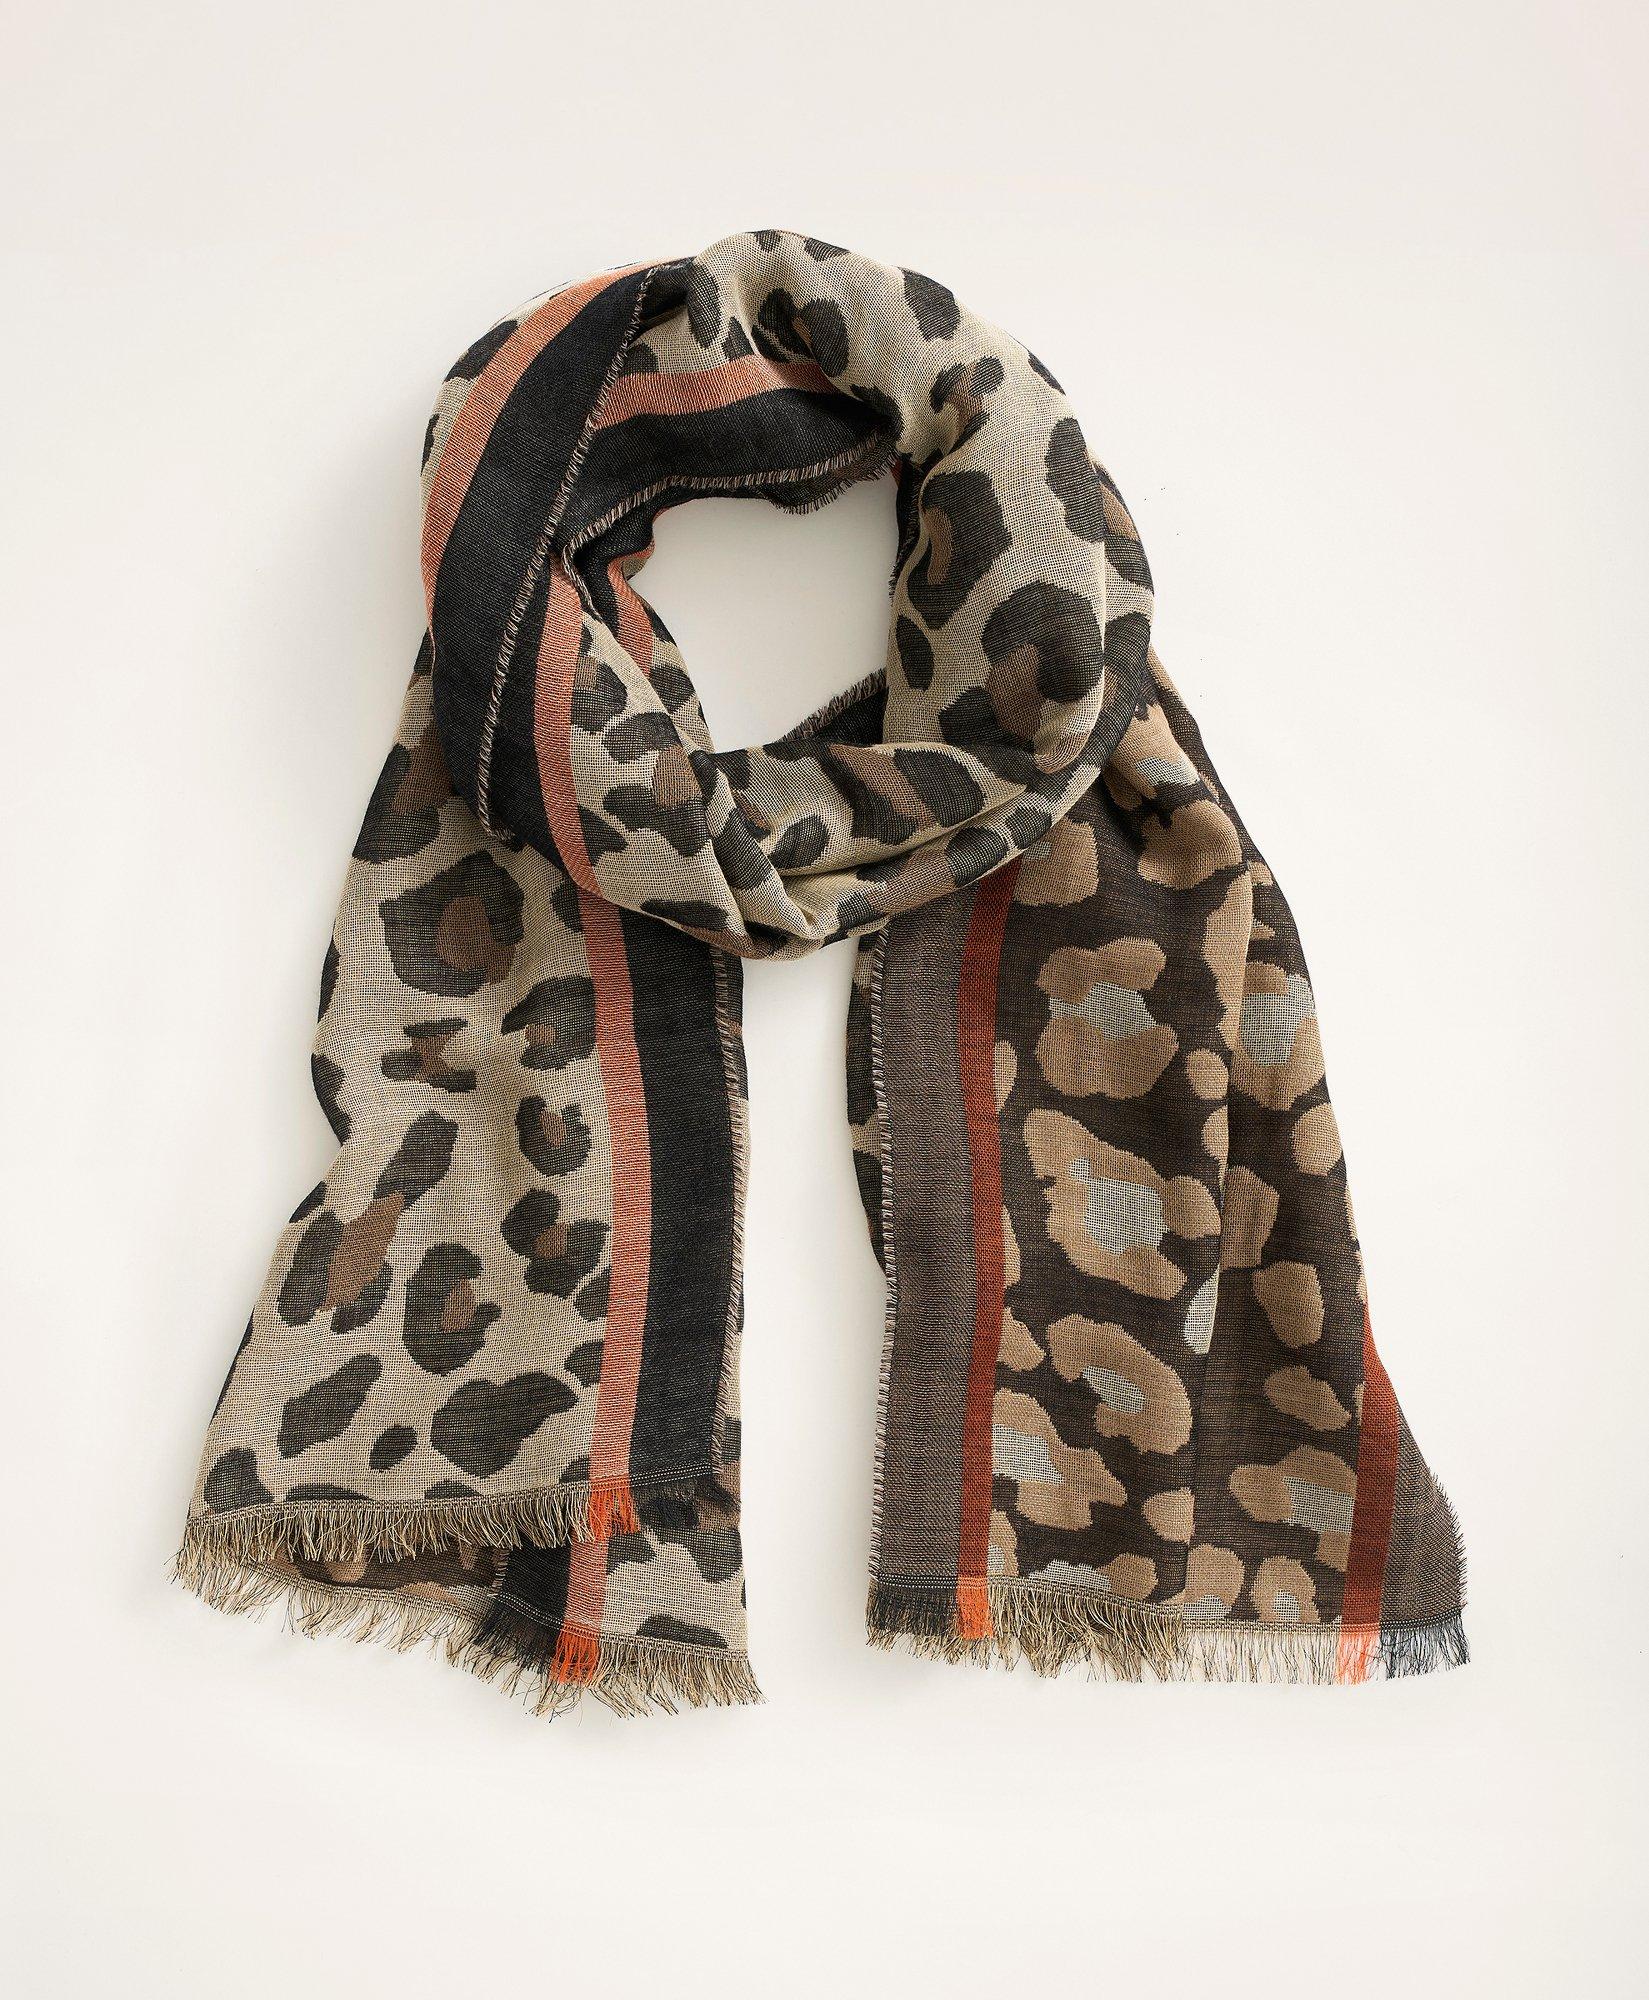 Brooks Brothers Women's Animal Print Scarf - Shop Holiday Gifts and Styles